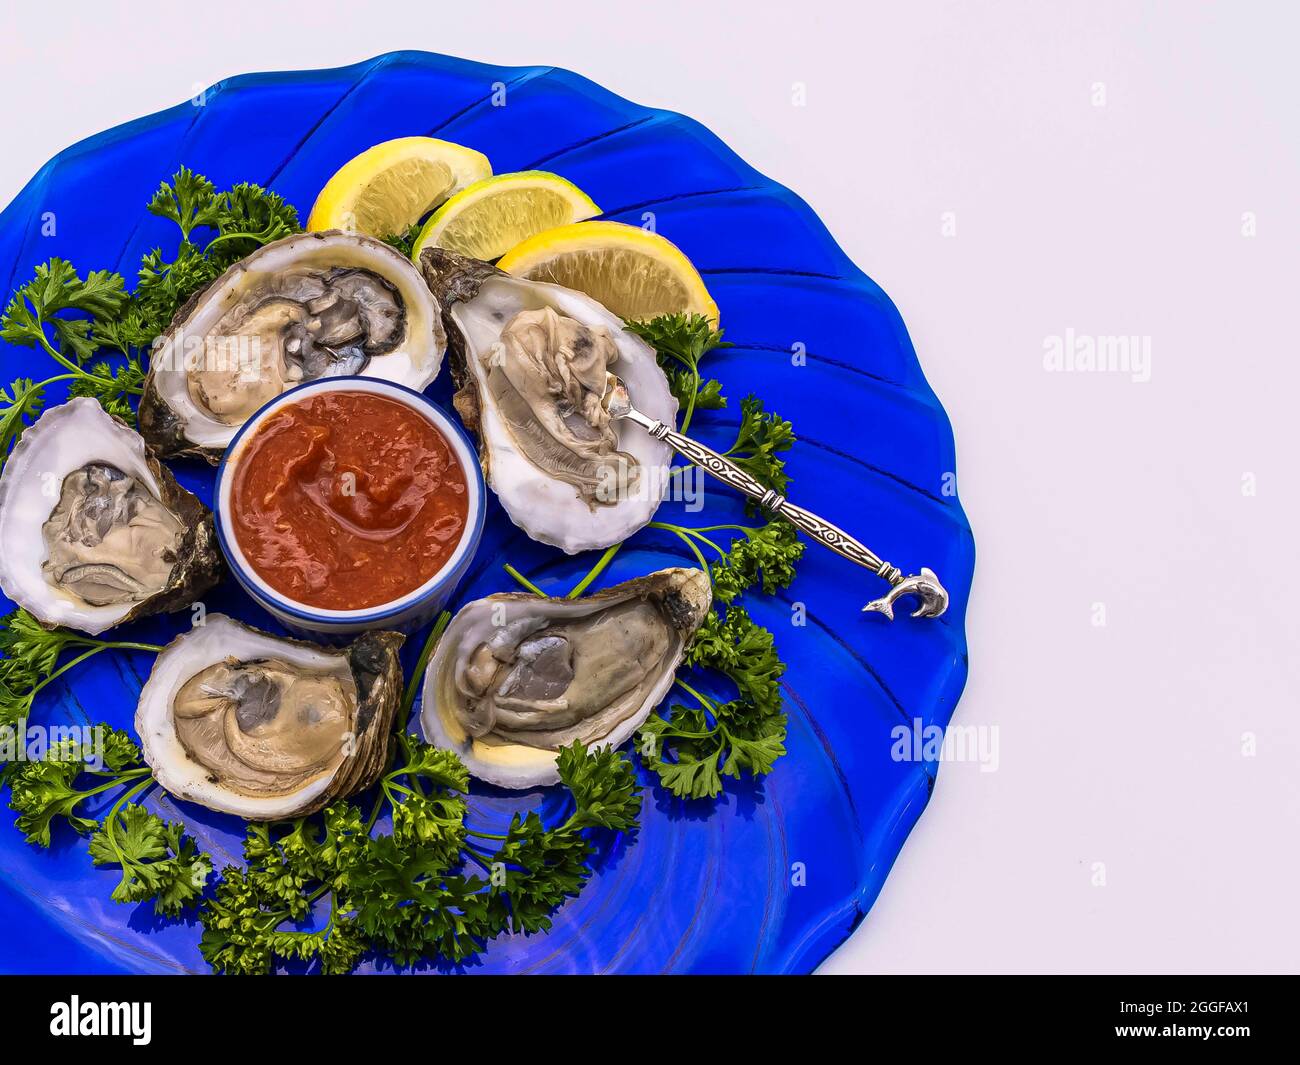 Oysters on thee half-shell served with a silver fork, red cocktail sauce, lemon and lime slices on a round blue glass plate. Stock Photo